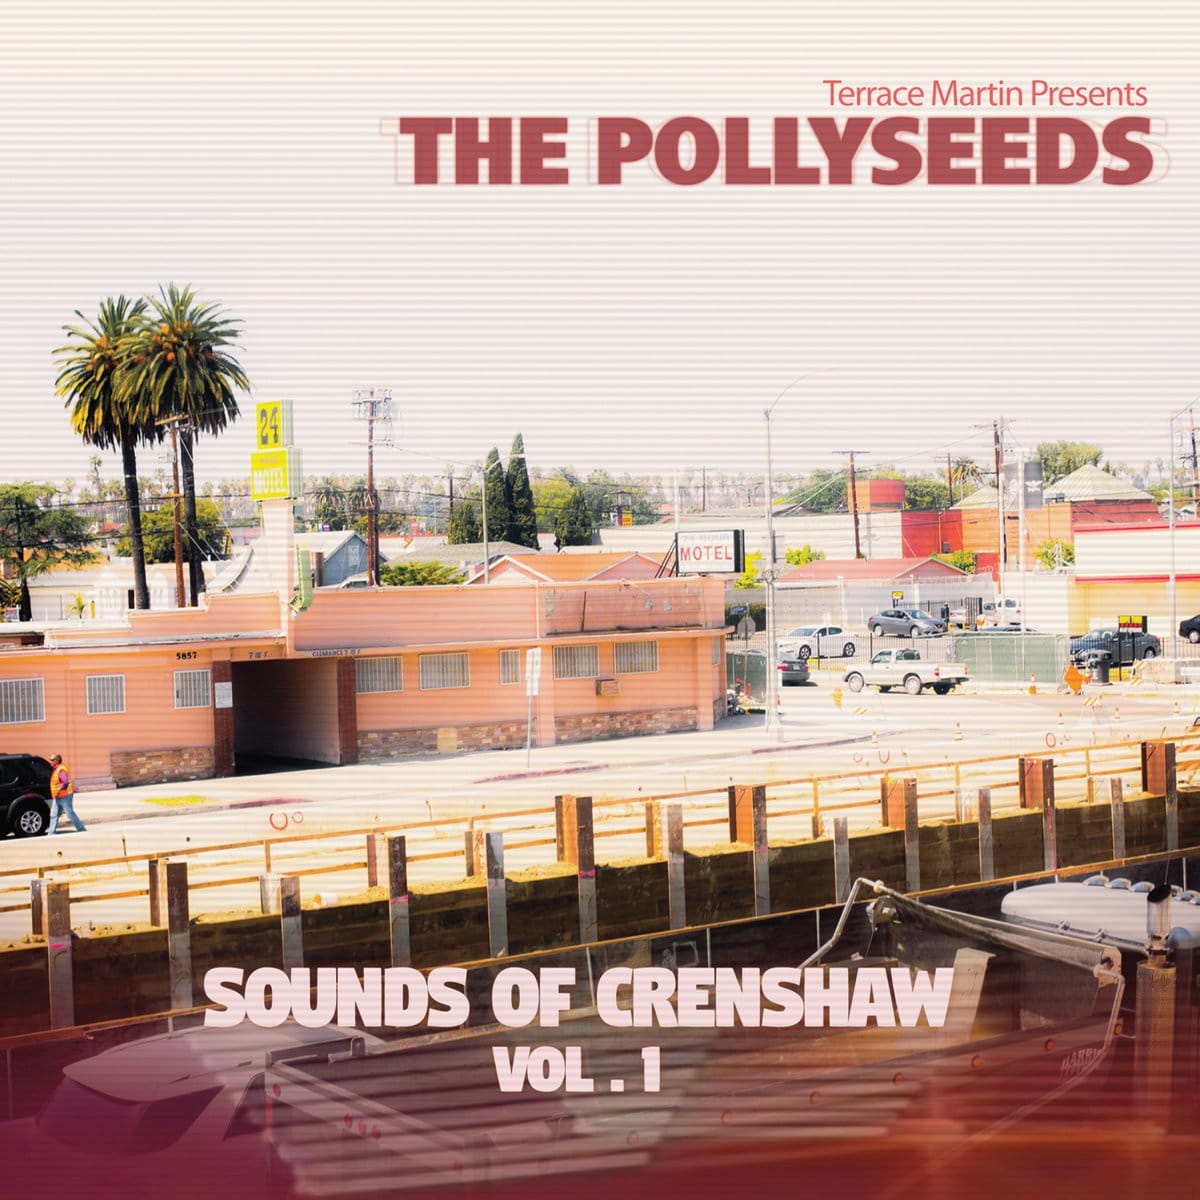 Terrace Martin & The Pollyseeds - "Intention" ft. Chachi (Video) & "Sounds of Crenshaw, Vol. 1" (Release)